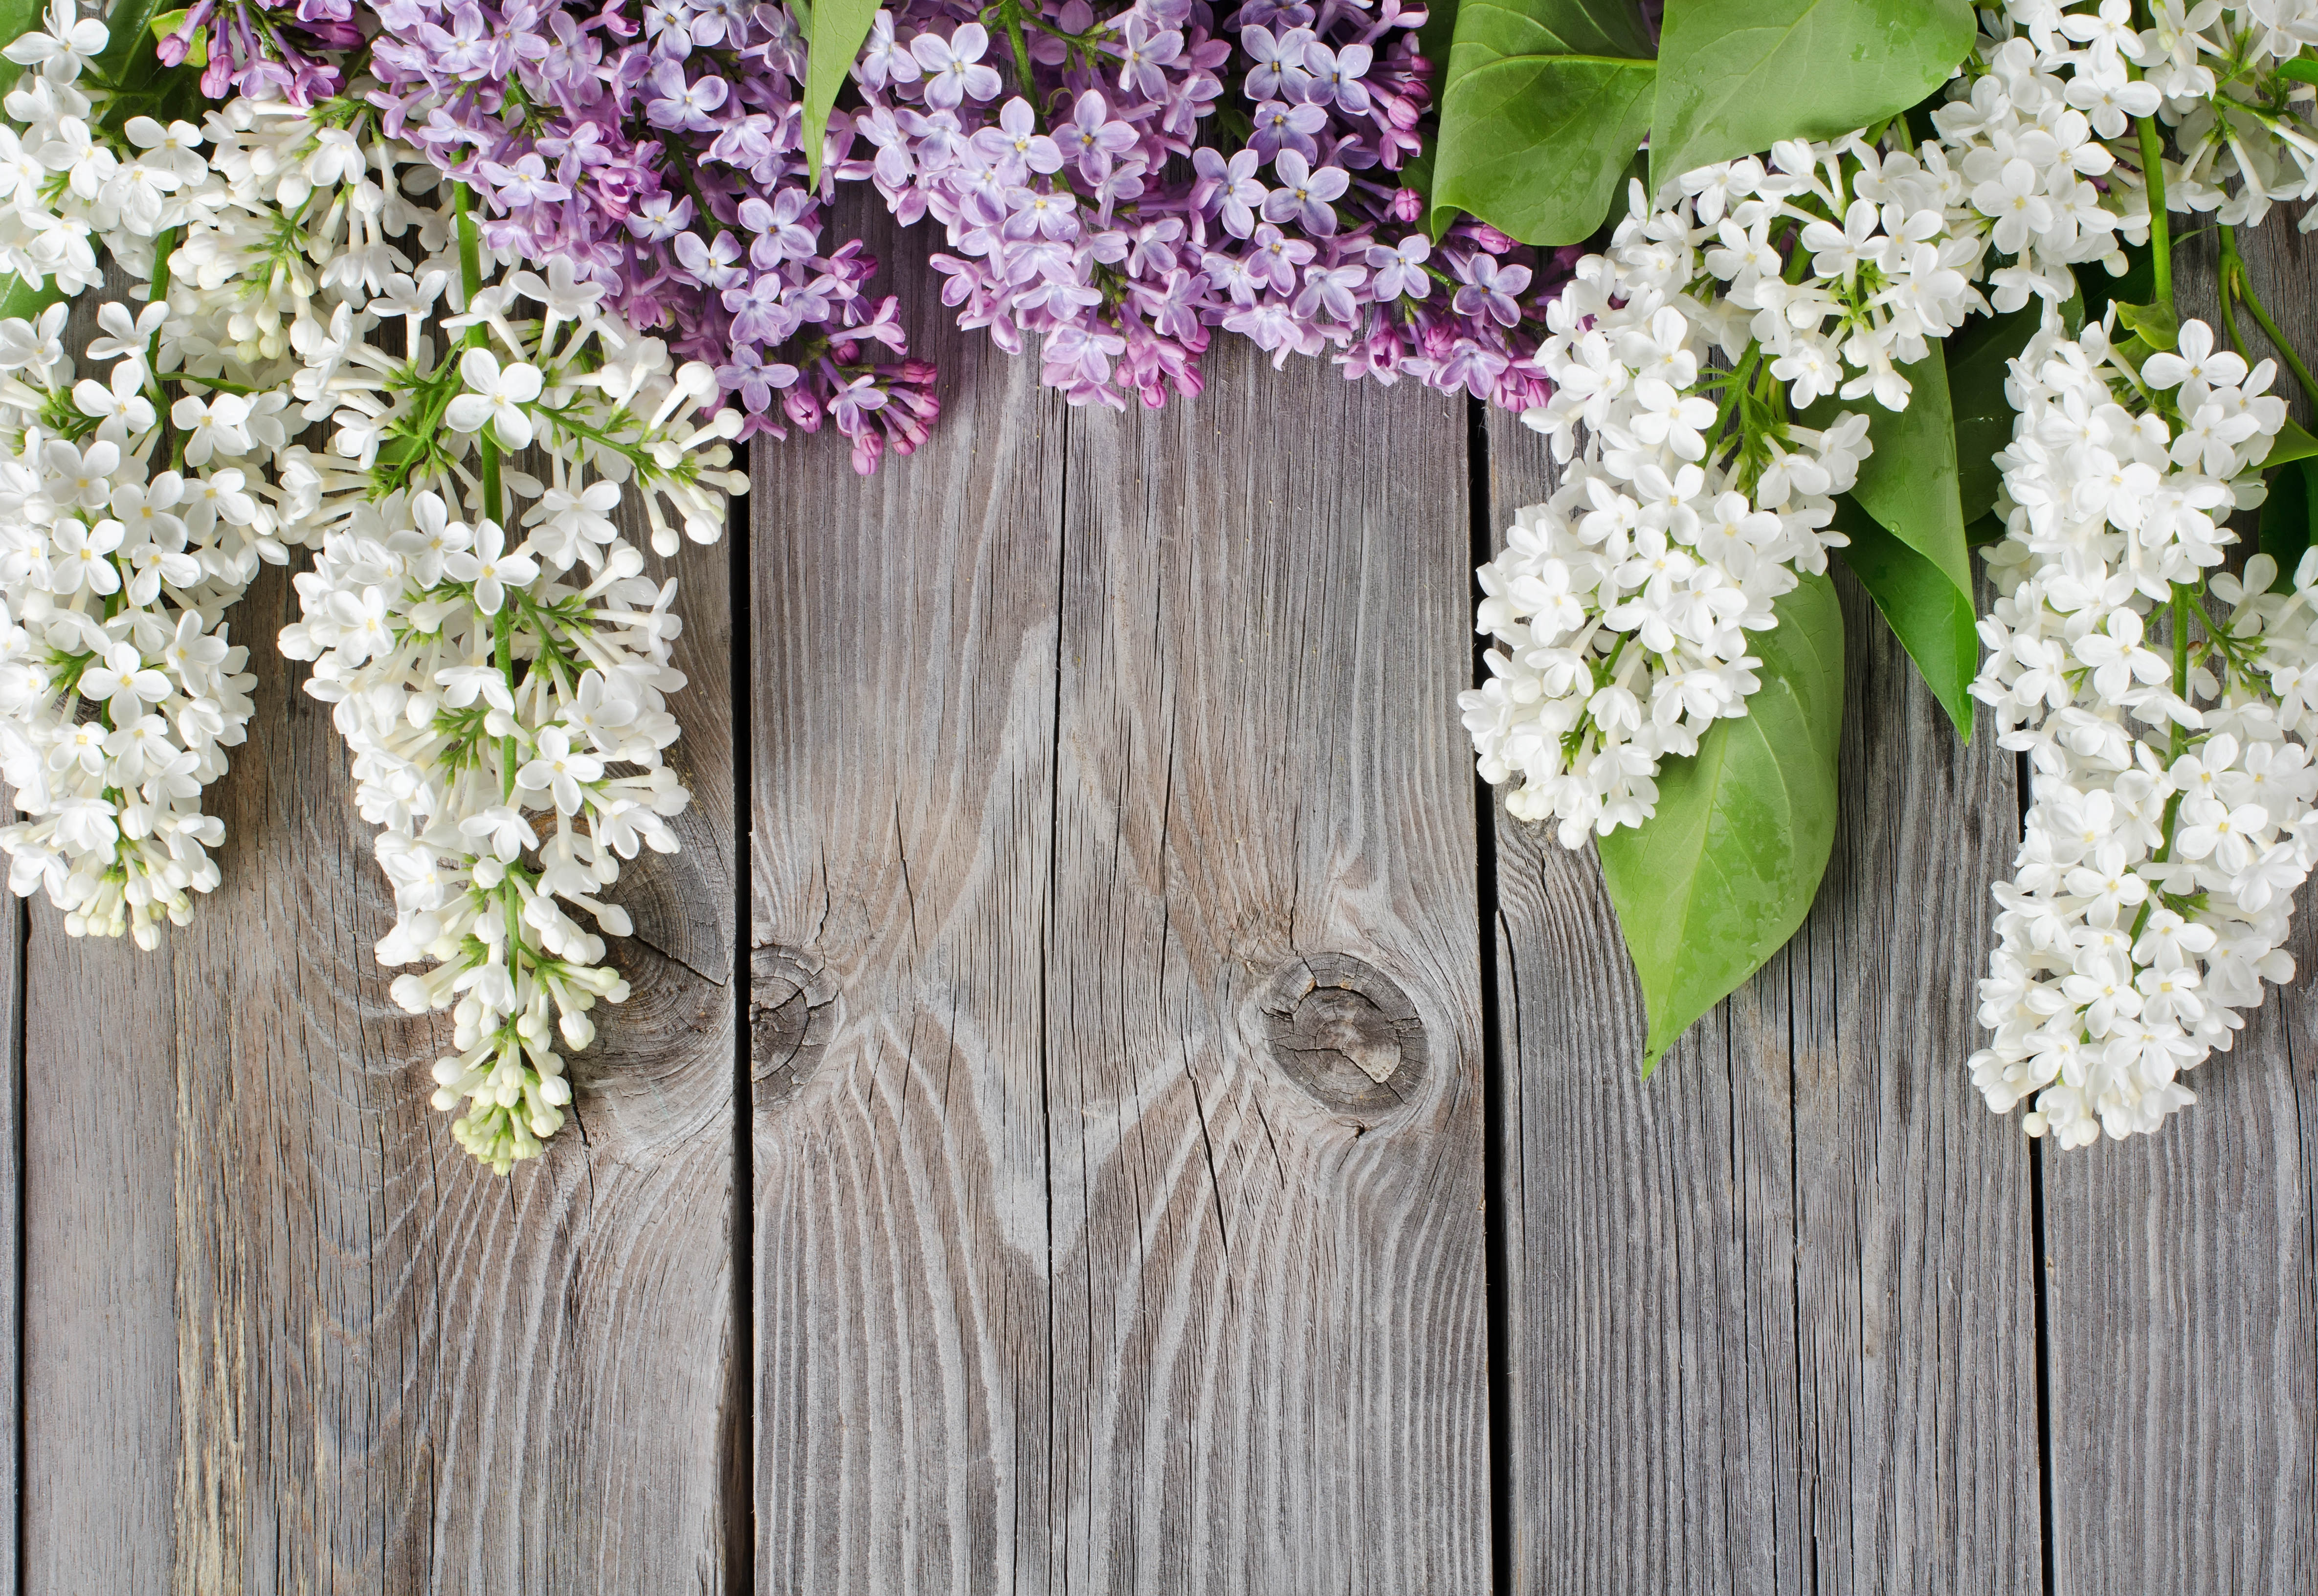 Wallpaper lilac board wood background wallpapers flowers   download 4740x3264